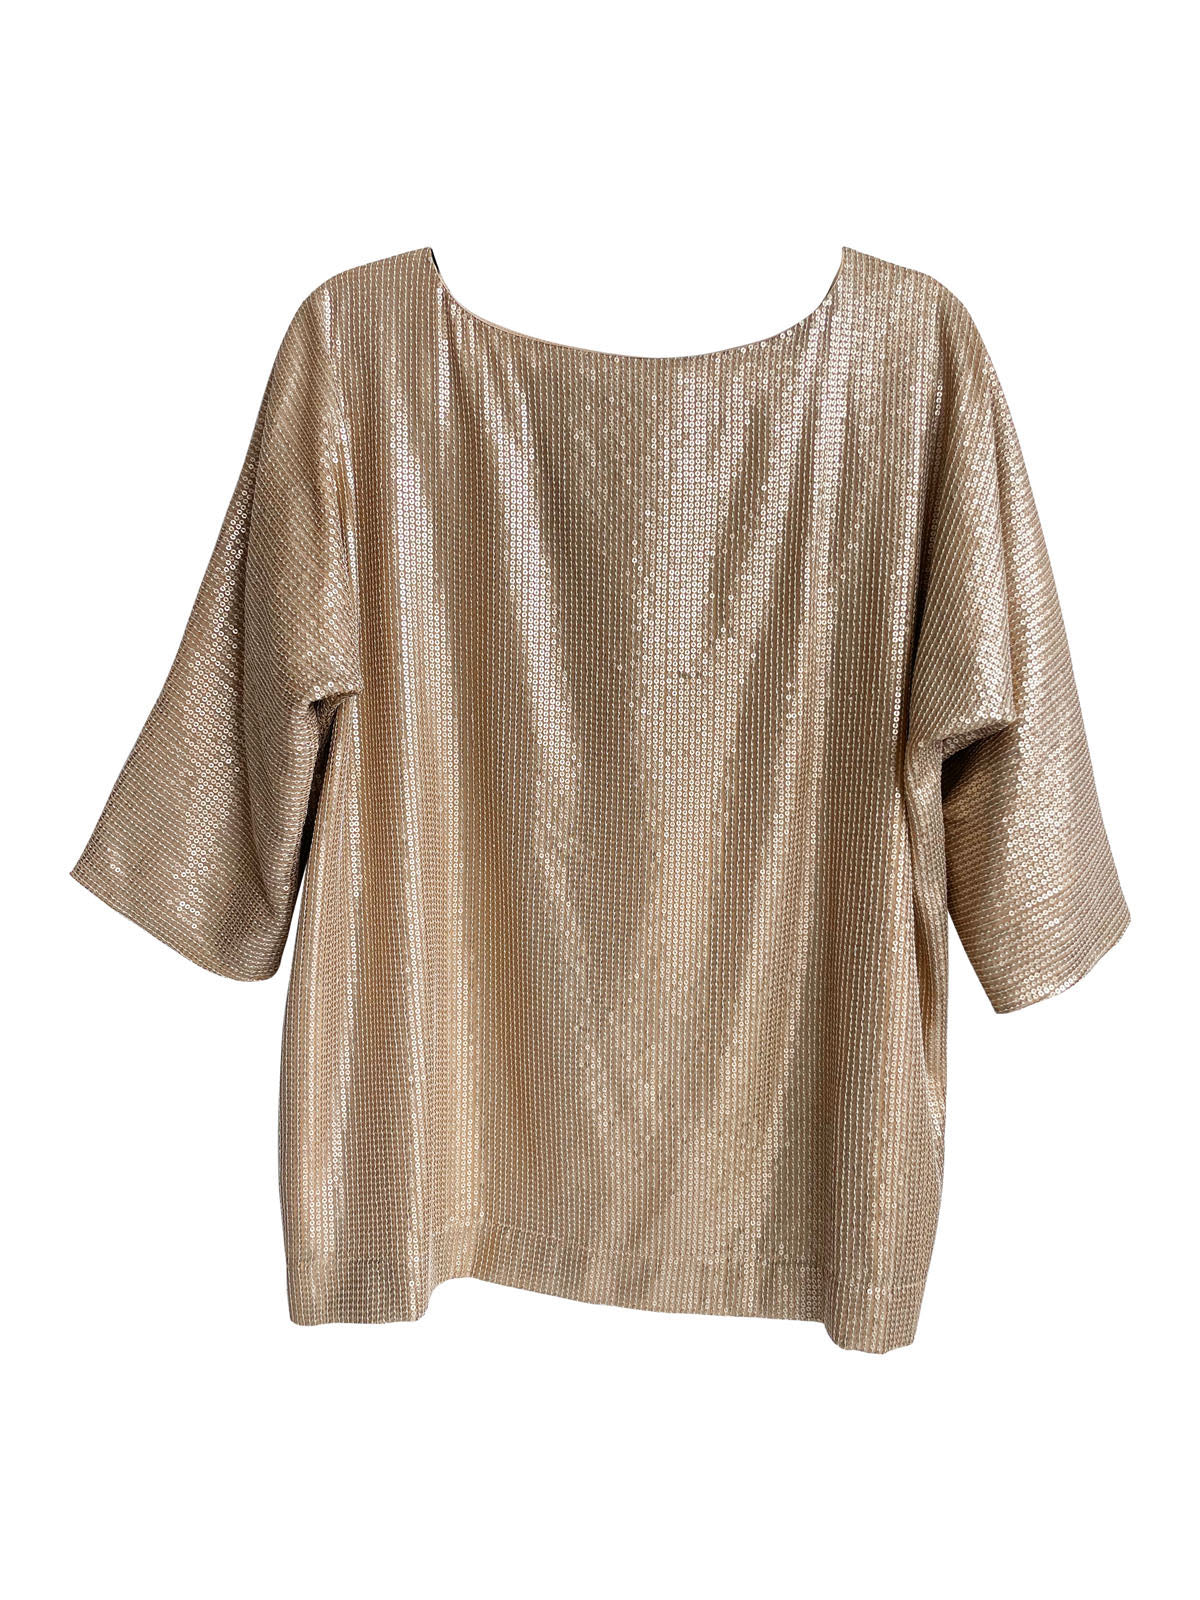 SEQUIN SHIFT TOP GOLD